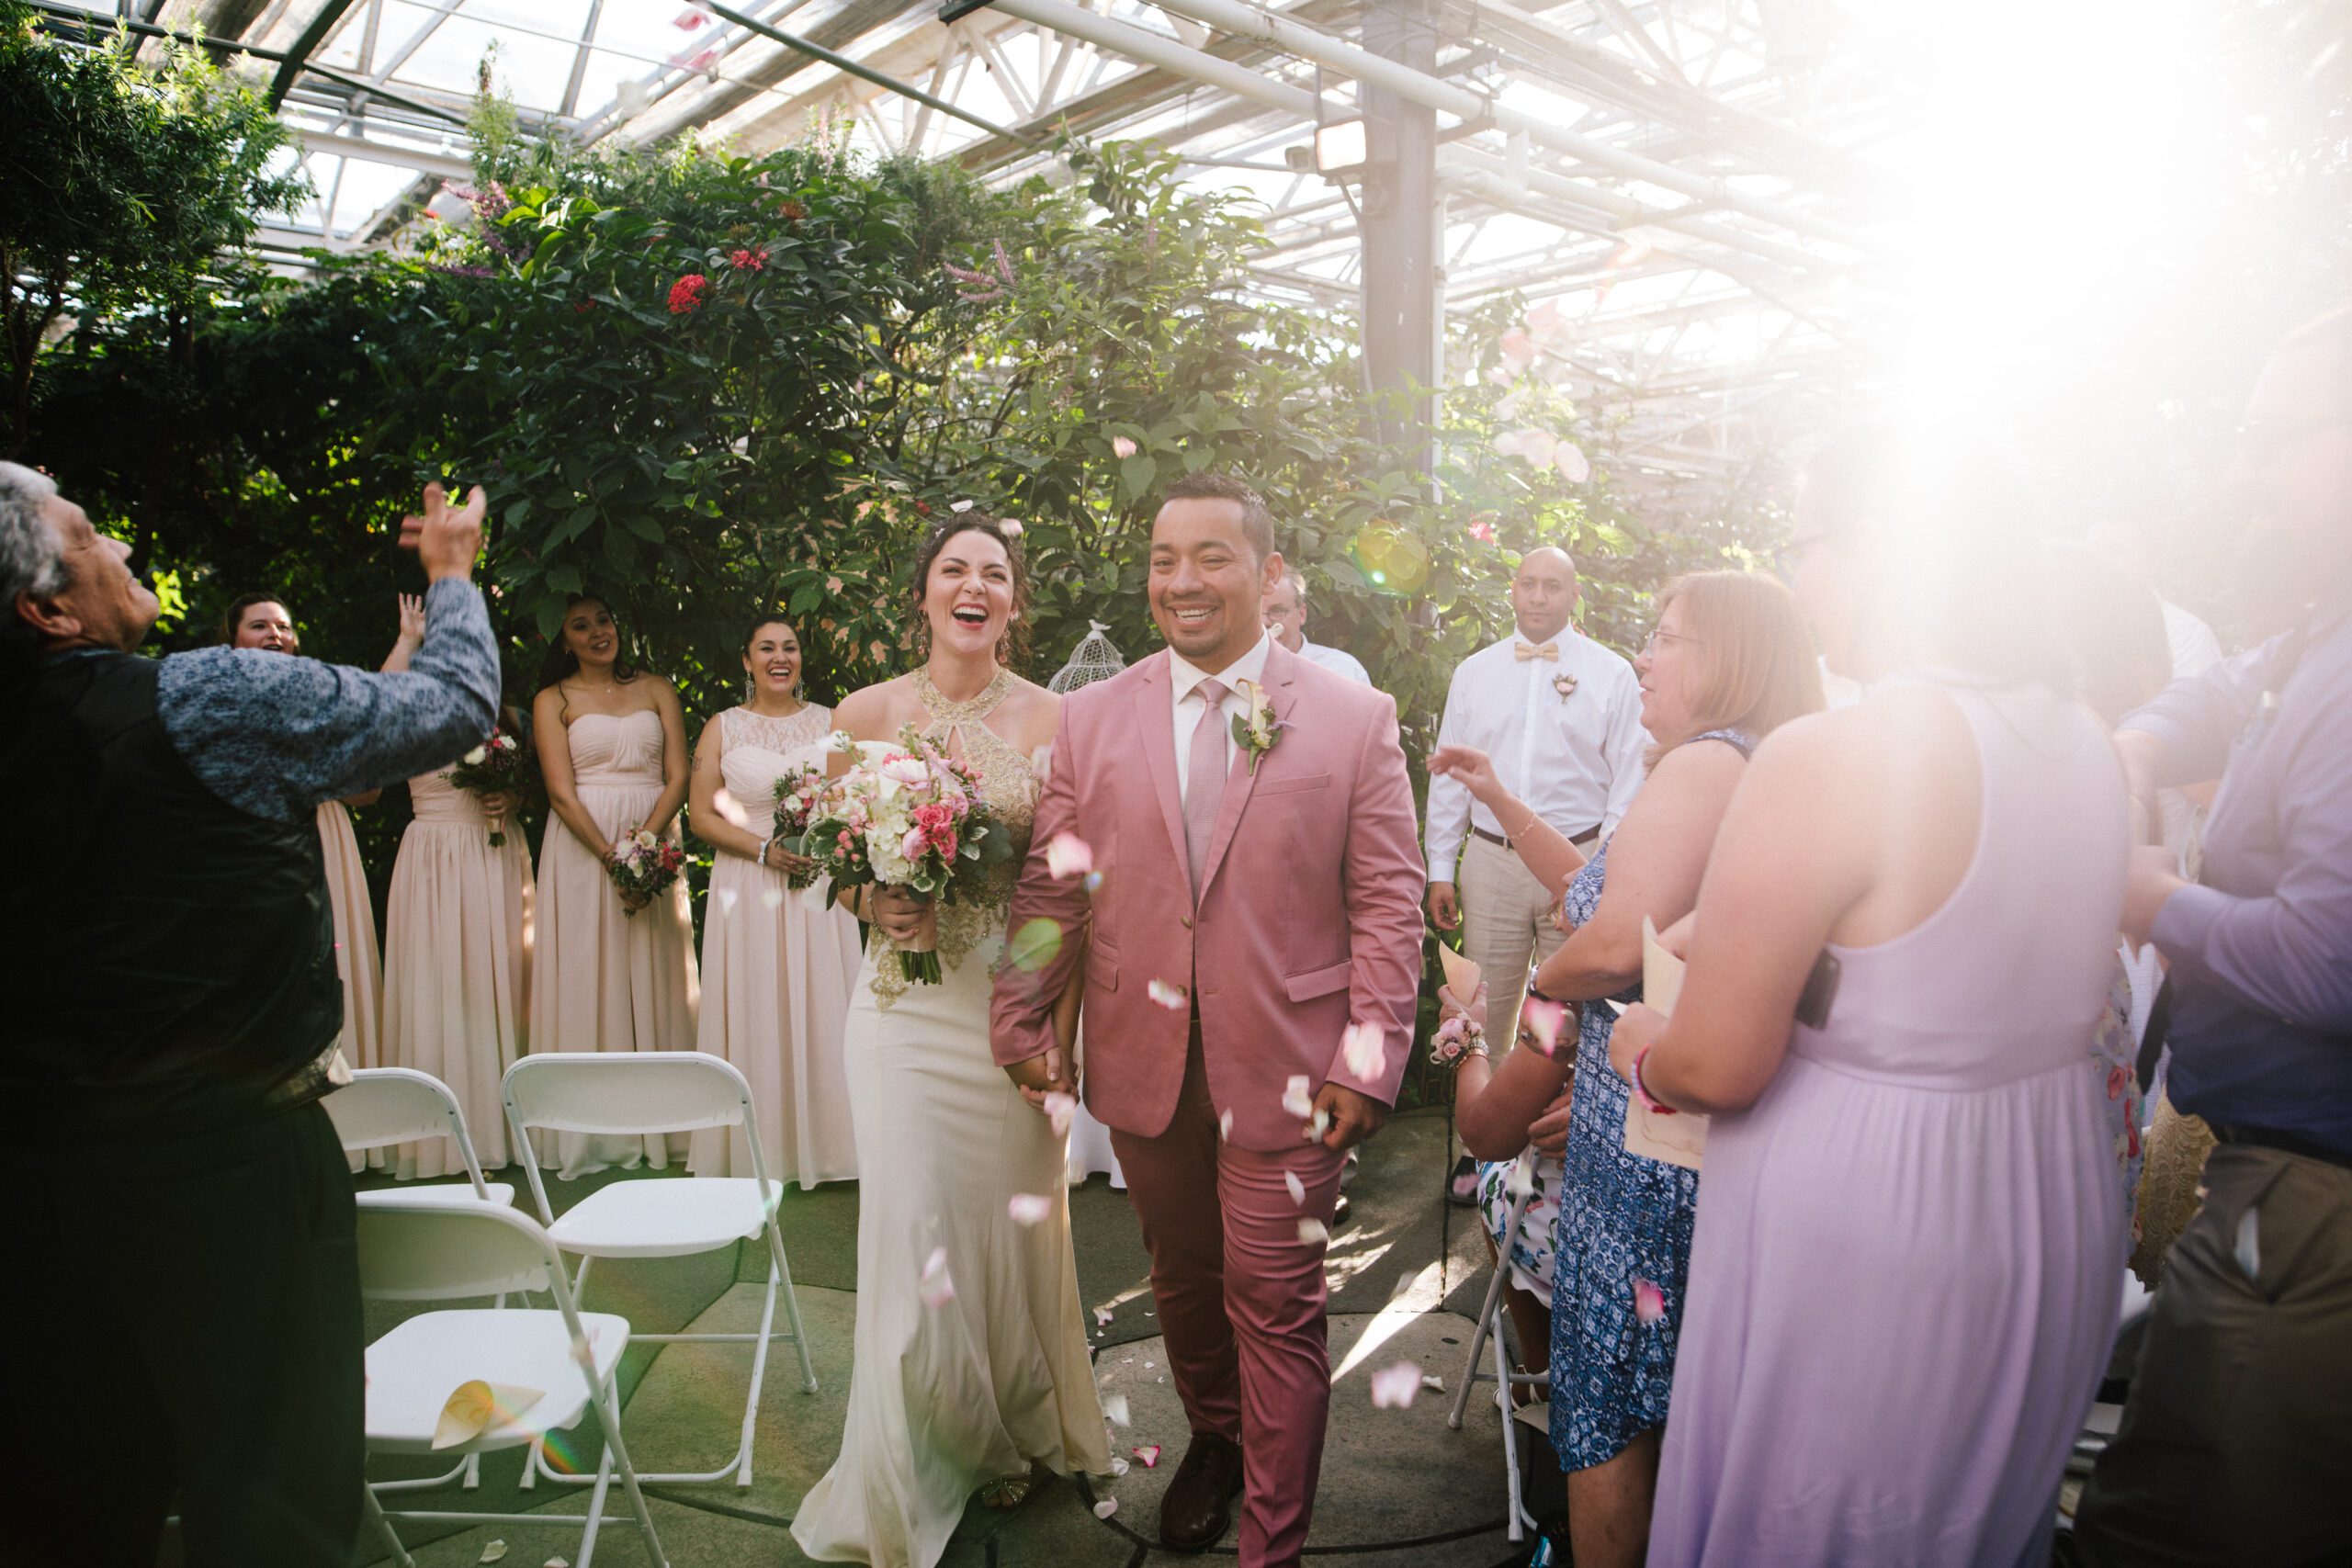 The guests throw flowers in the air as the bride and groom walk down the aisle as husband wife at their Butterfly Pavilion Wedding. 